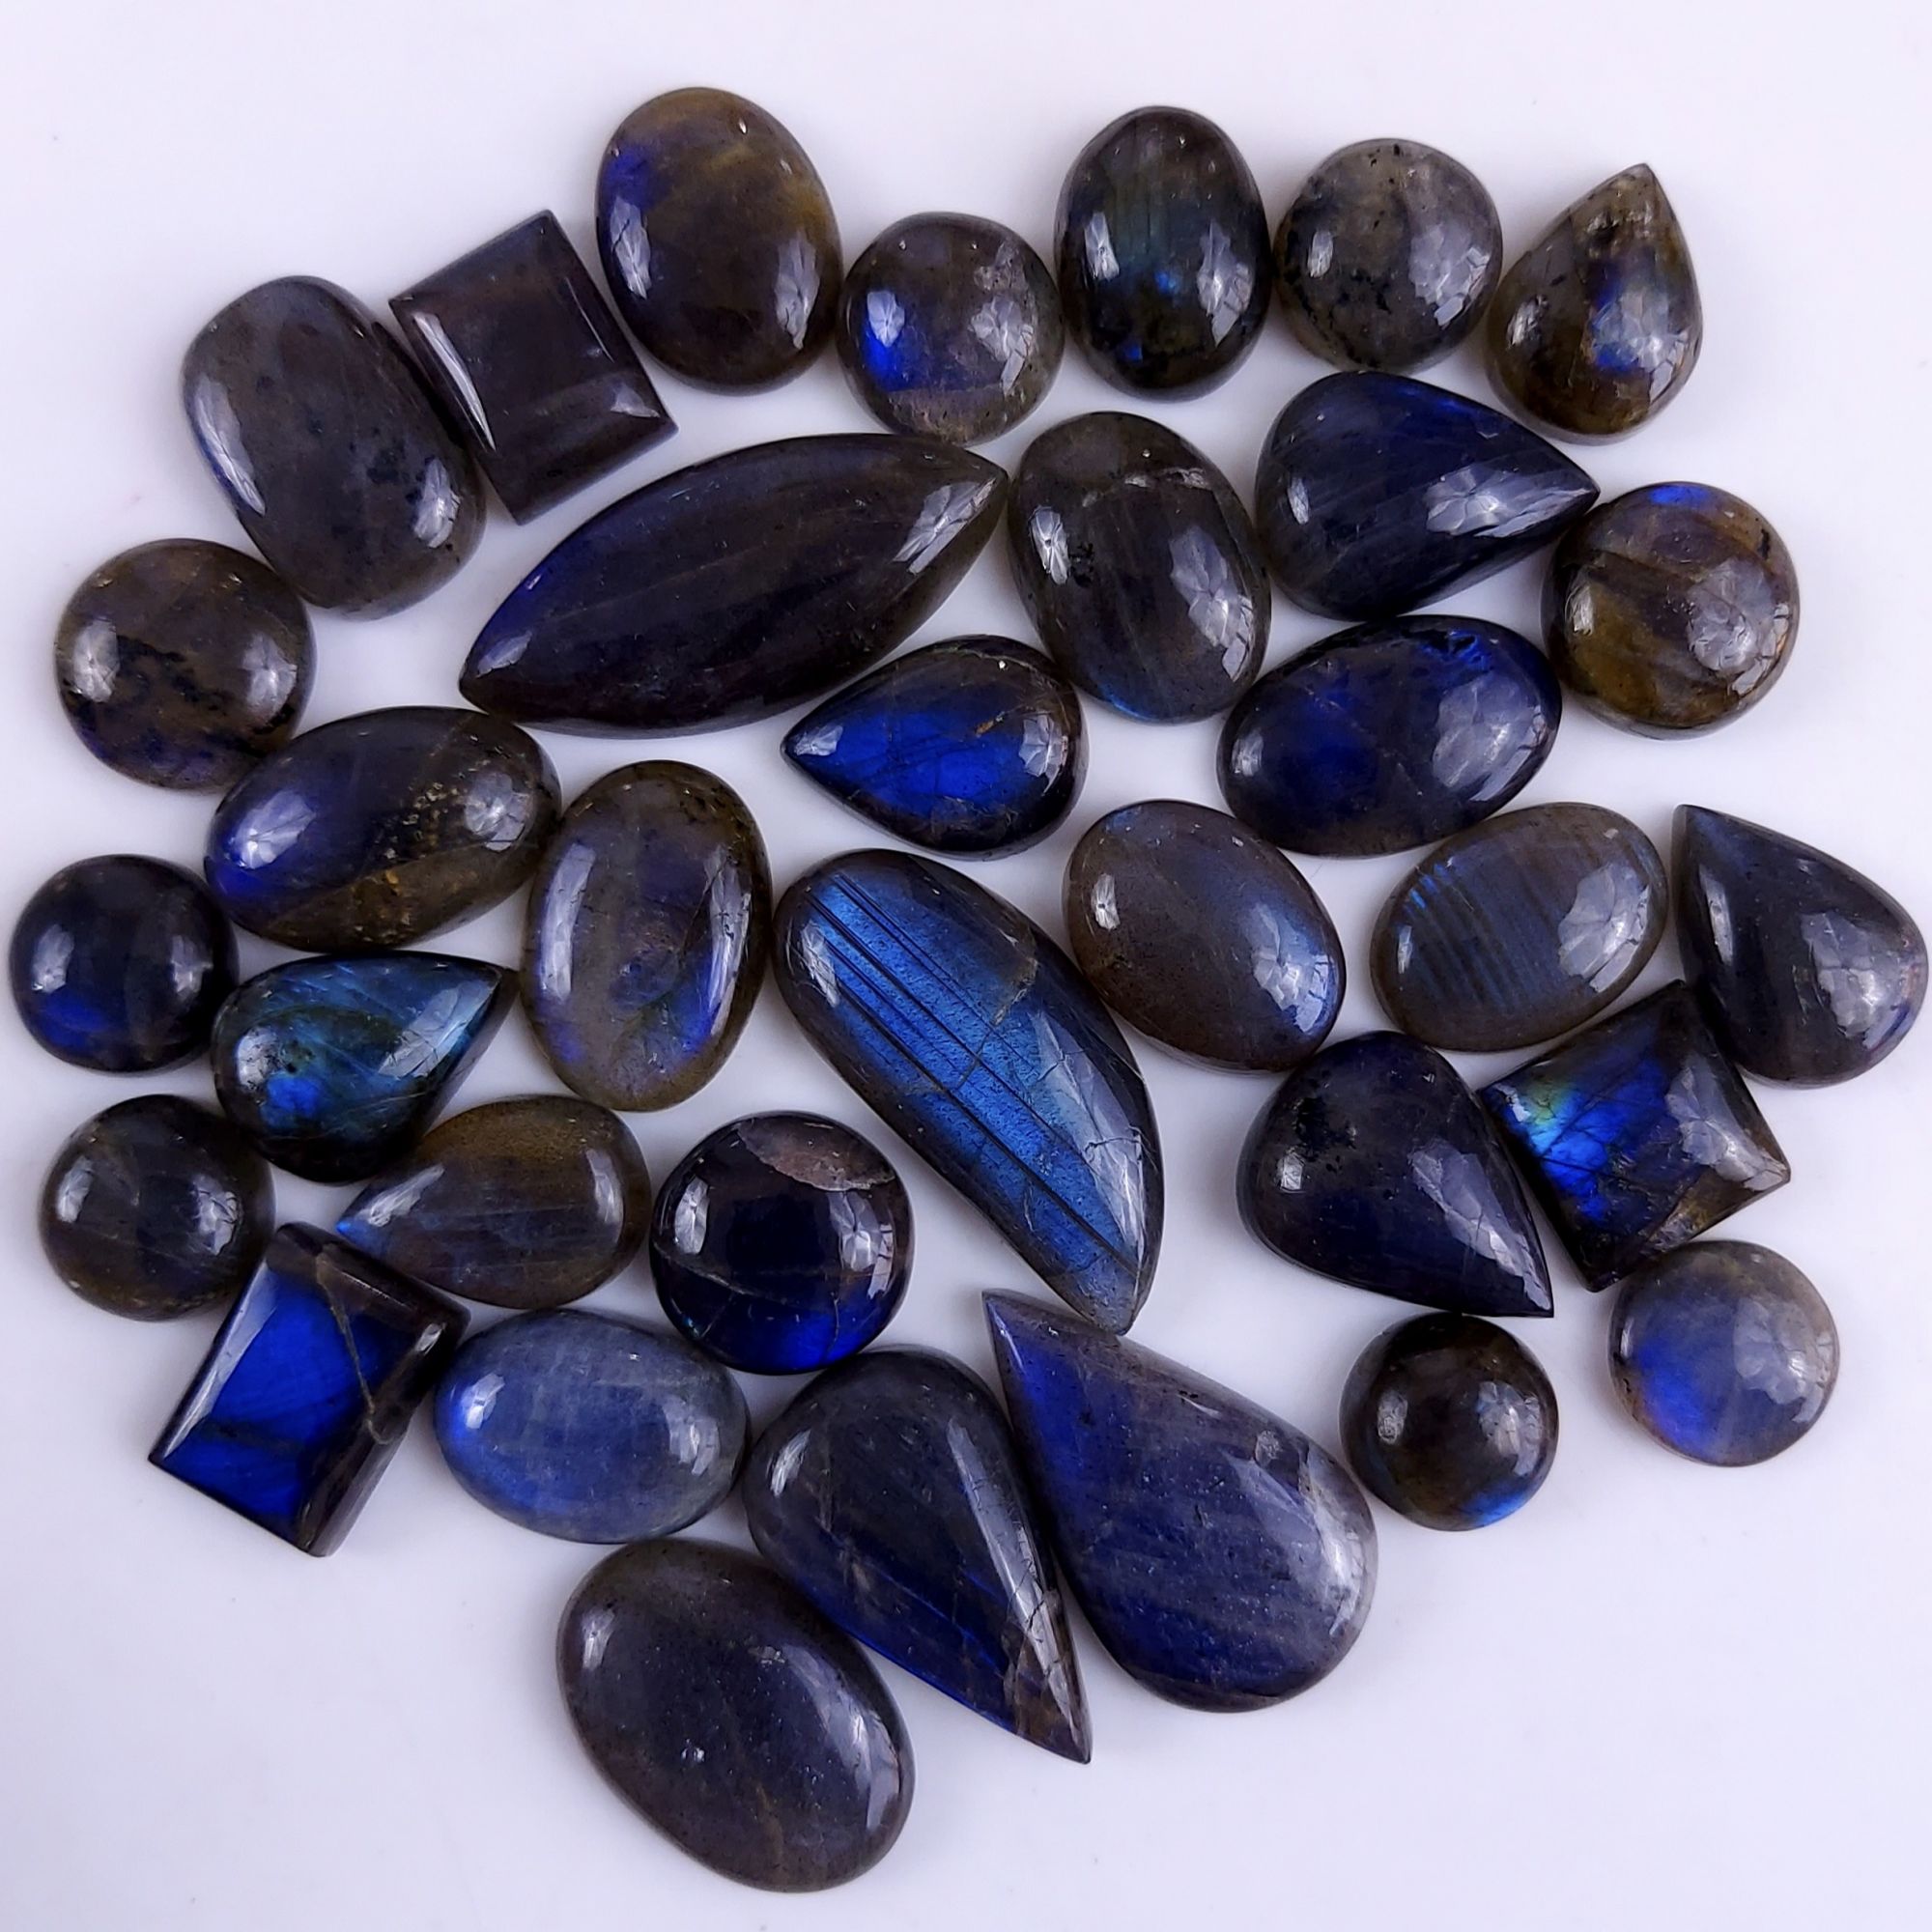 34Pcs 409Cts Natural Labradorite Calibrated Cabochon Mix Size And Shape Loose Gemstone Lot For Jewelry Making 33x14 12x12 mm#753